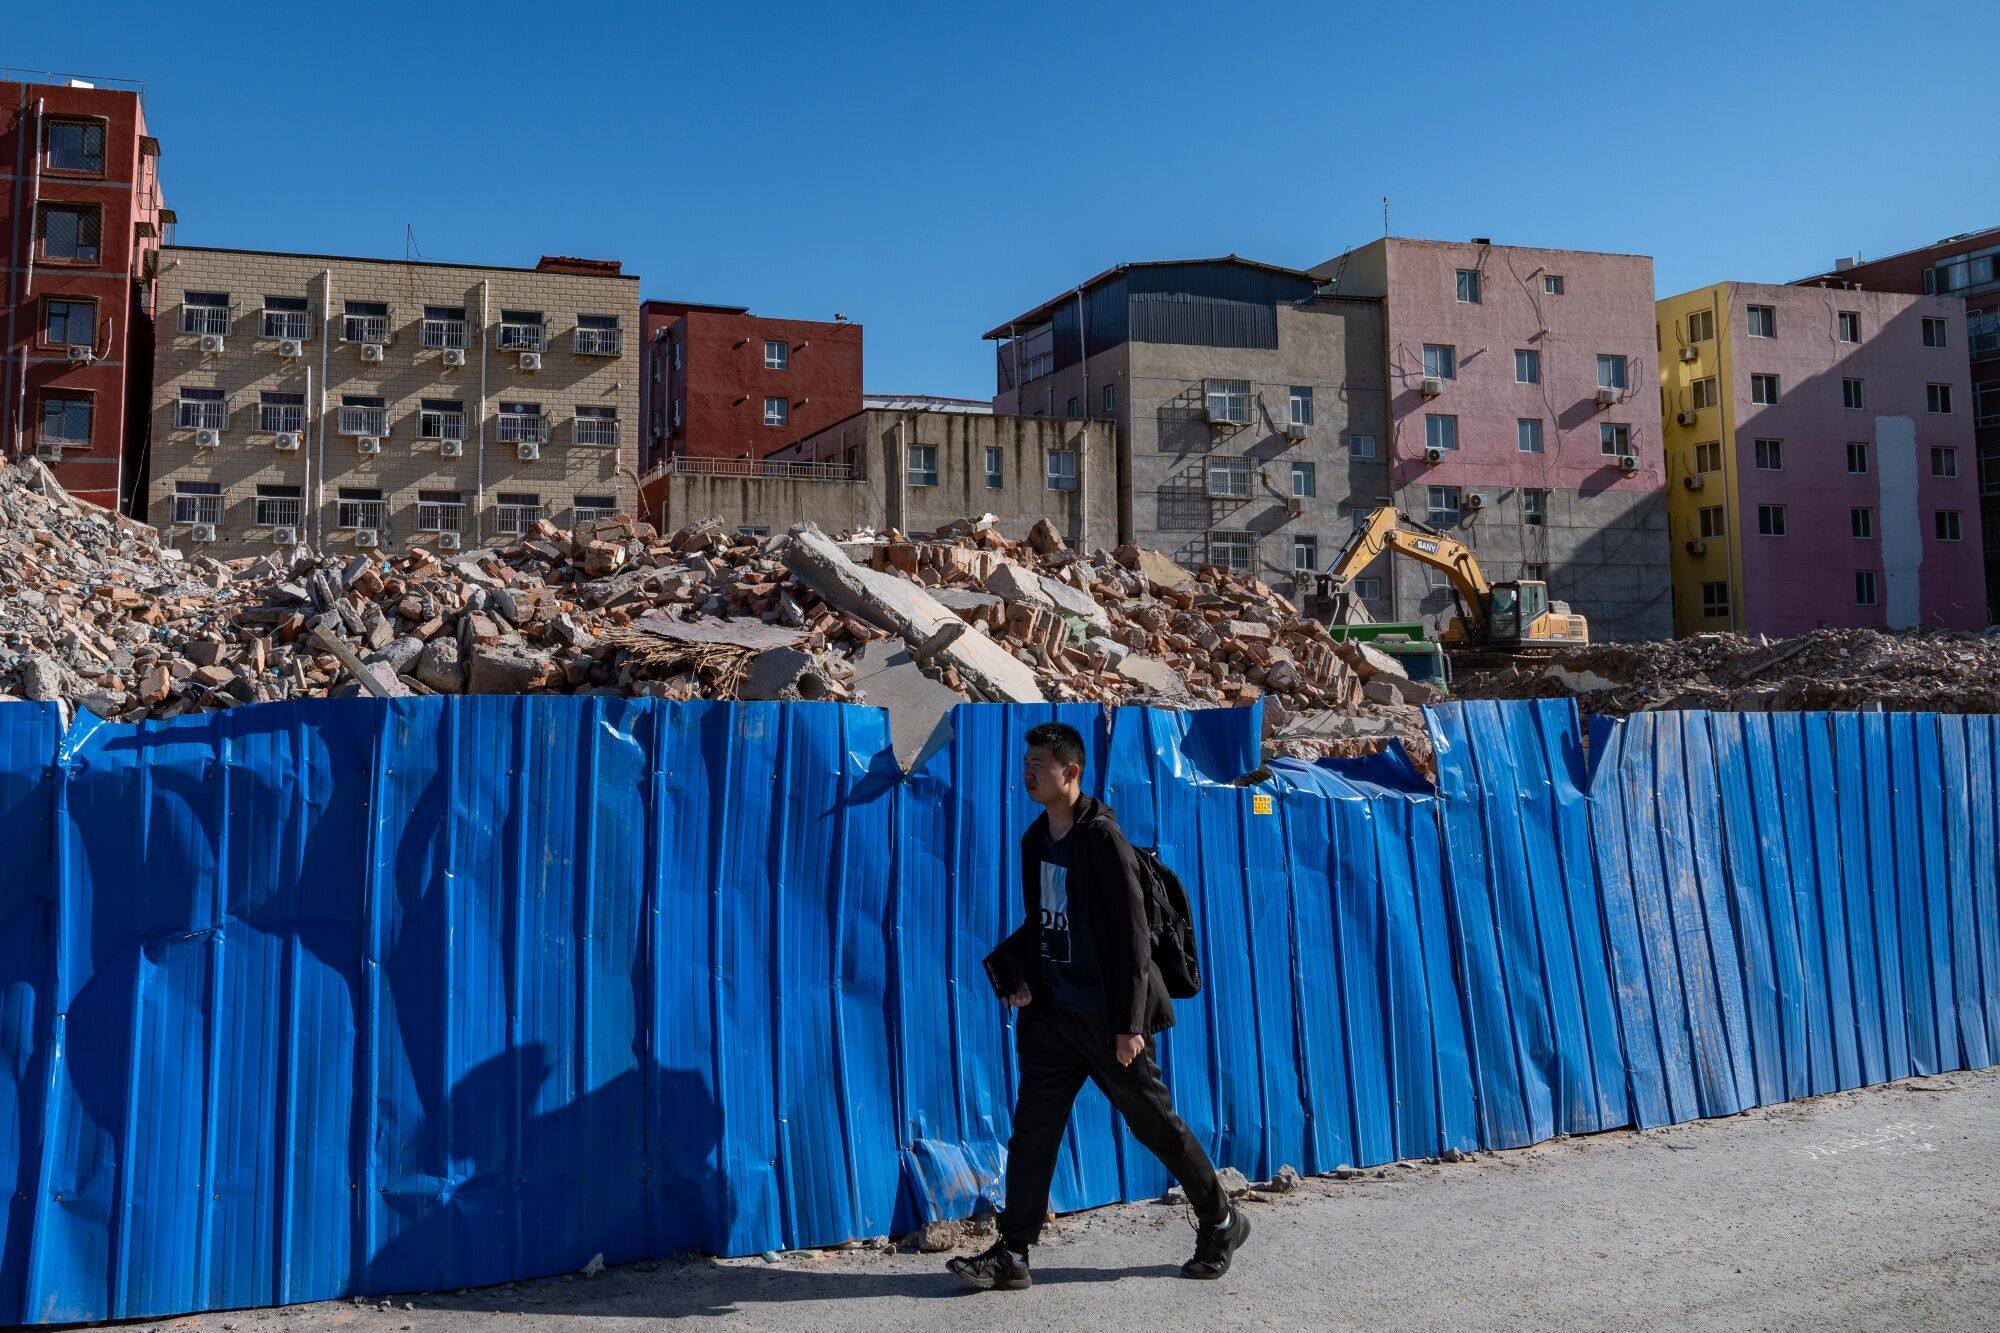 Demolished buildings are seen in a village in Beijing amid a slump in China’s property sector. Financing support among private developers could also be unevenly distributed, with most banks choosing to support top performers and companies that have not yet defaulted on their debt, according to Fitch. Photo: Bloomberg